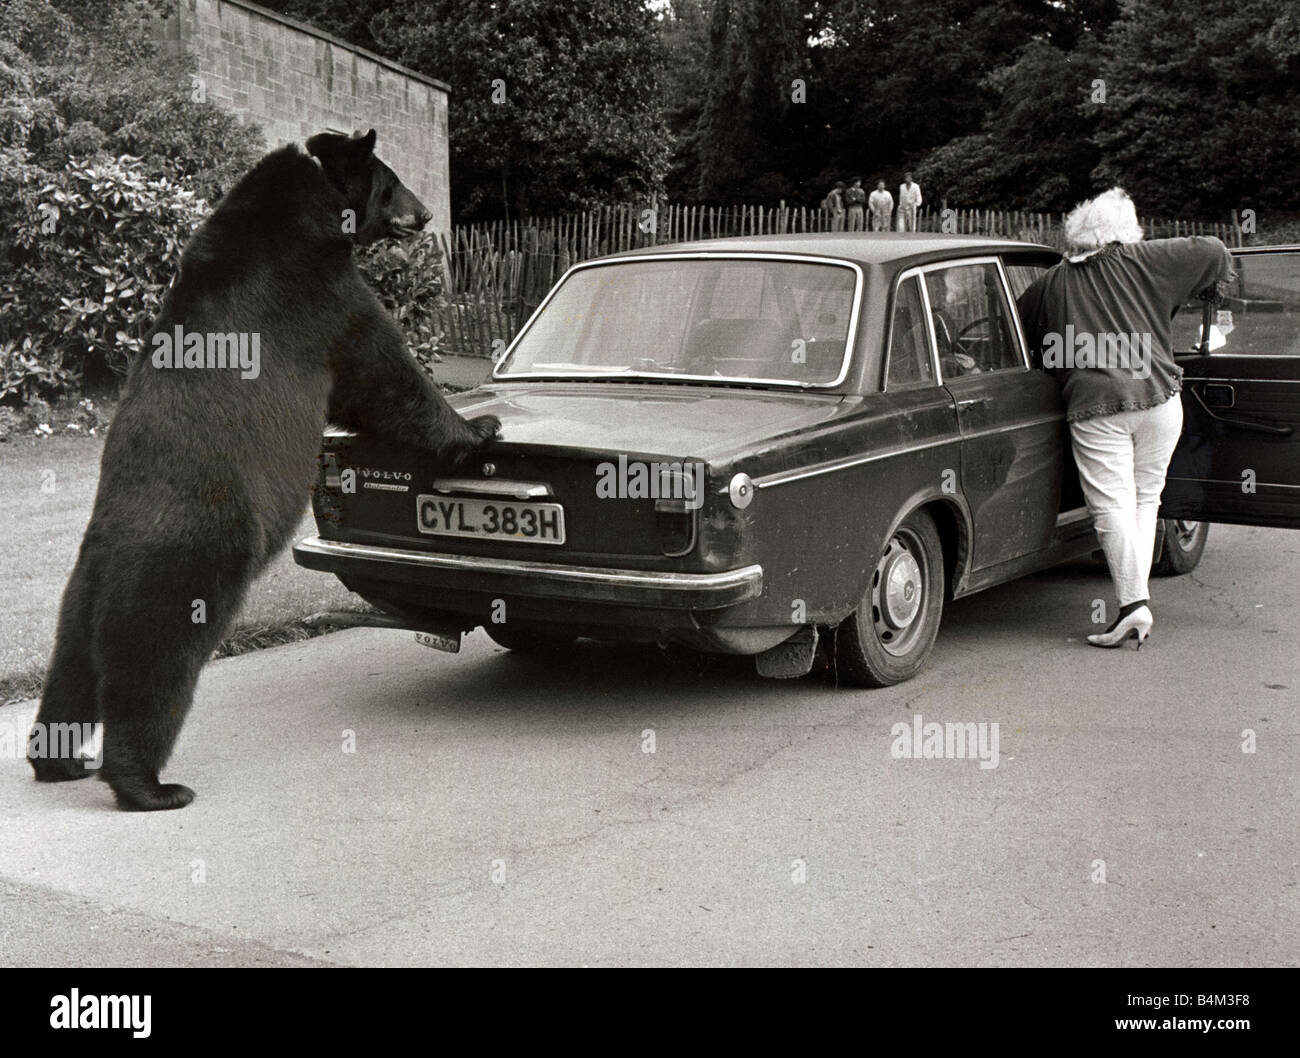 odin-the-6-5-foot-canadian-black-bear-who-pushes-his-owners-old-car-B4M3F8.jpg